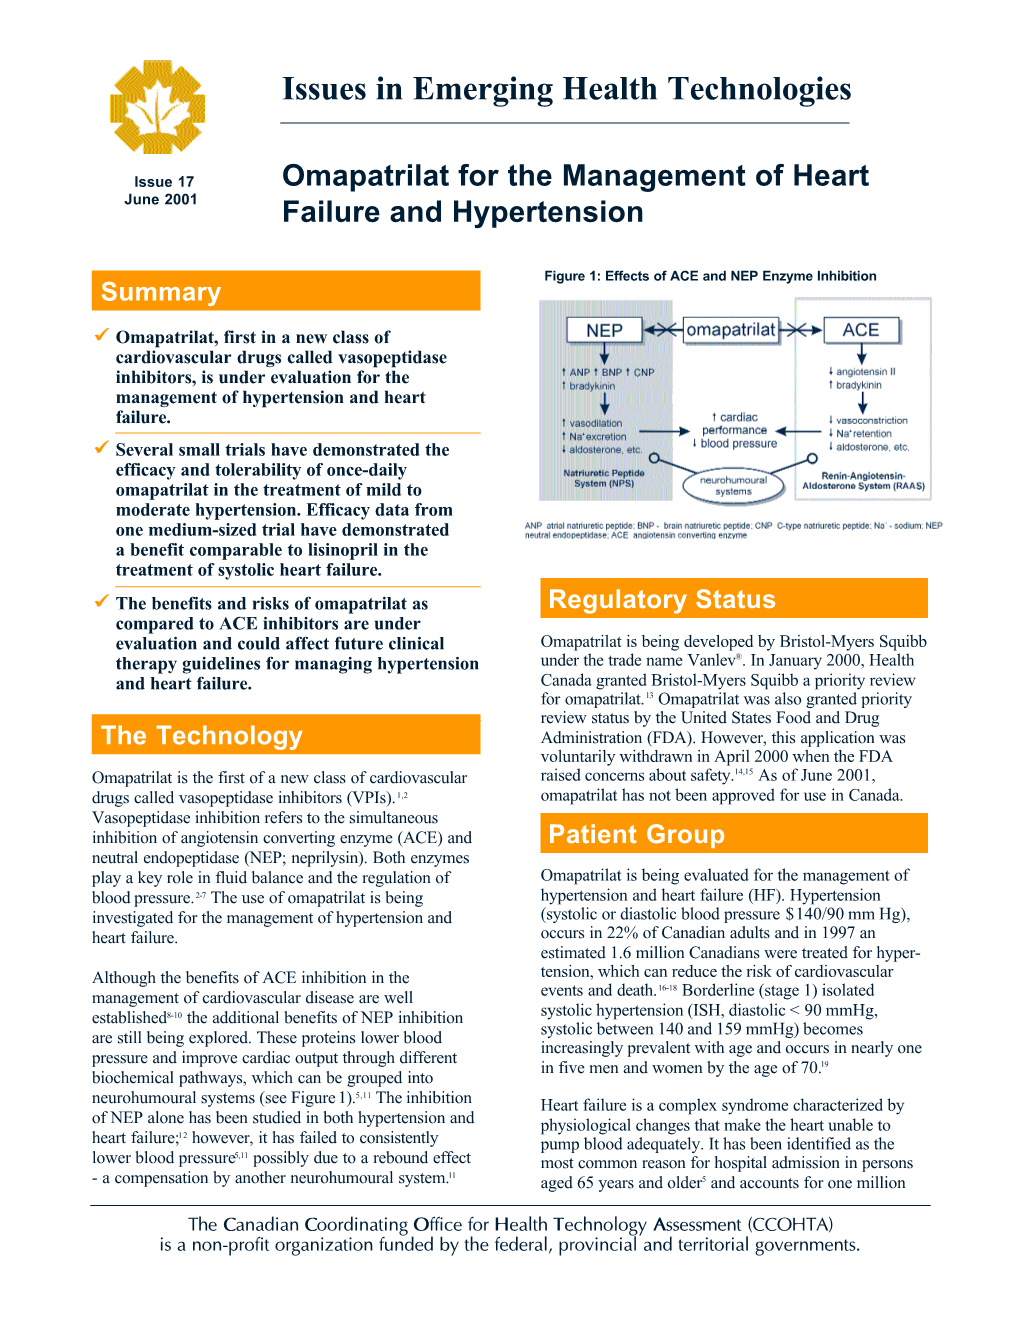 Omapatrilat for the Management of Heart Failure and Hypertension